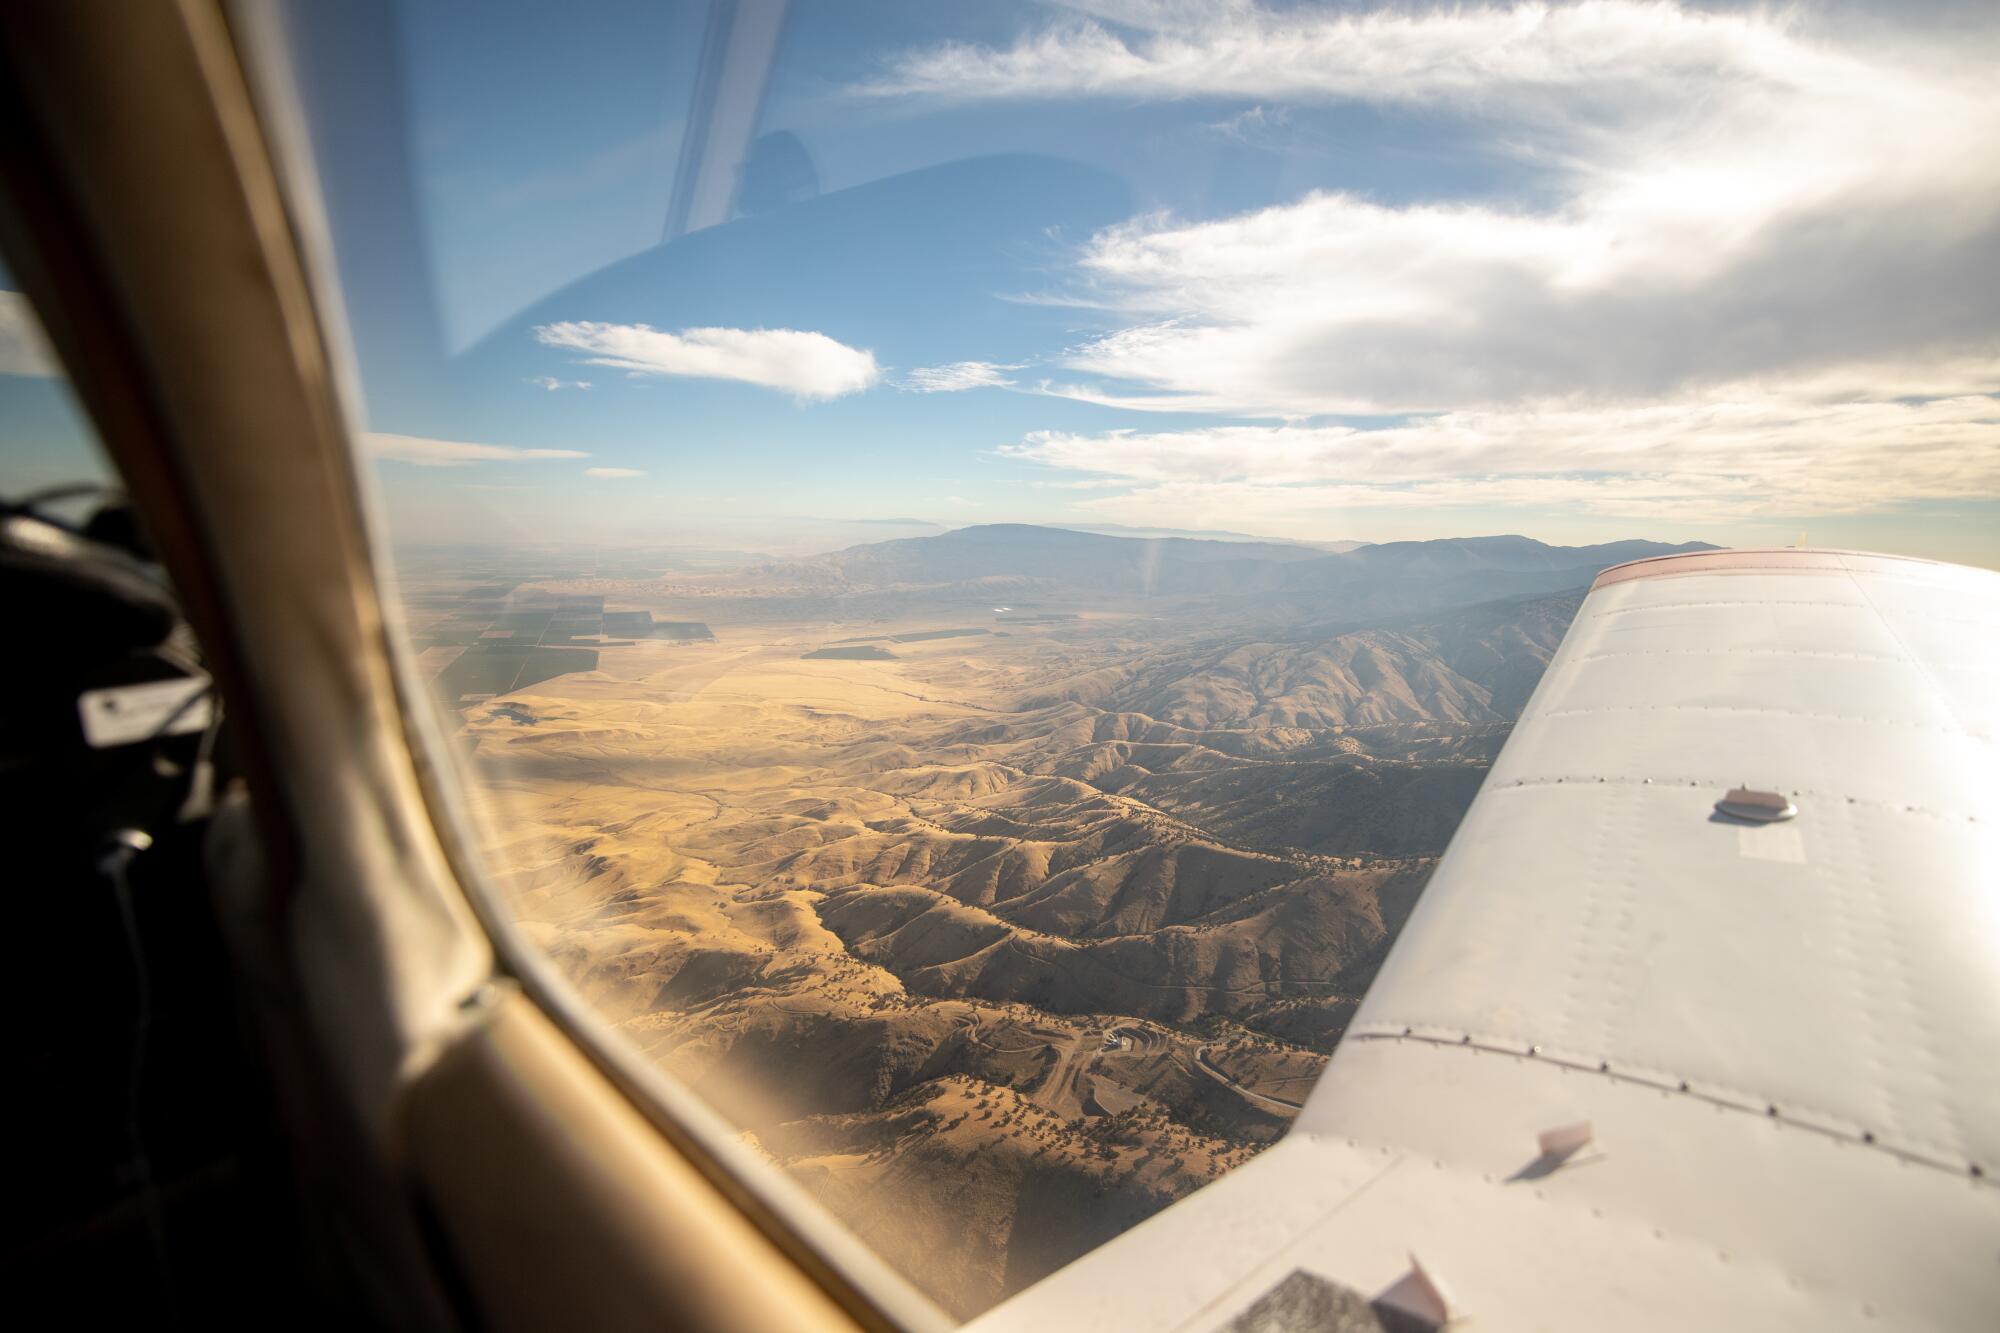 The California landscape, illuminated by the morning light, seen from the window of an airplane.